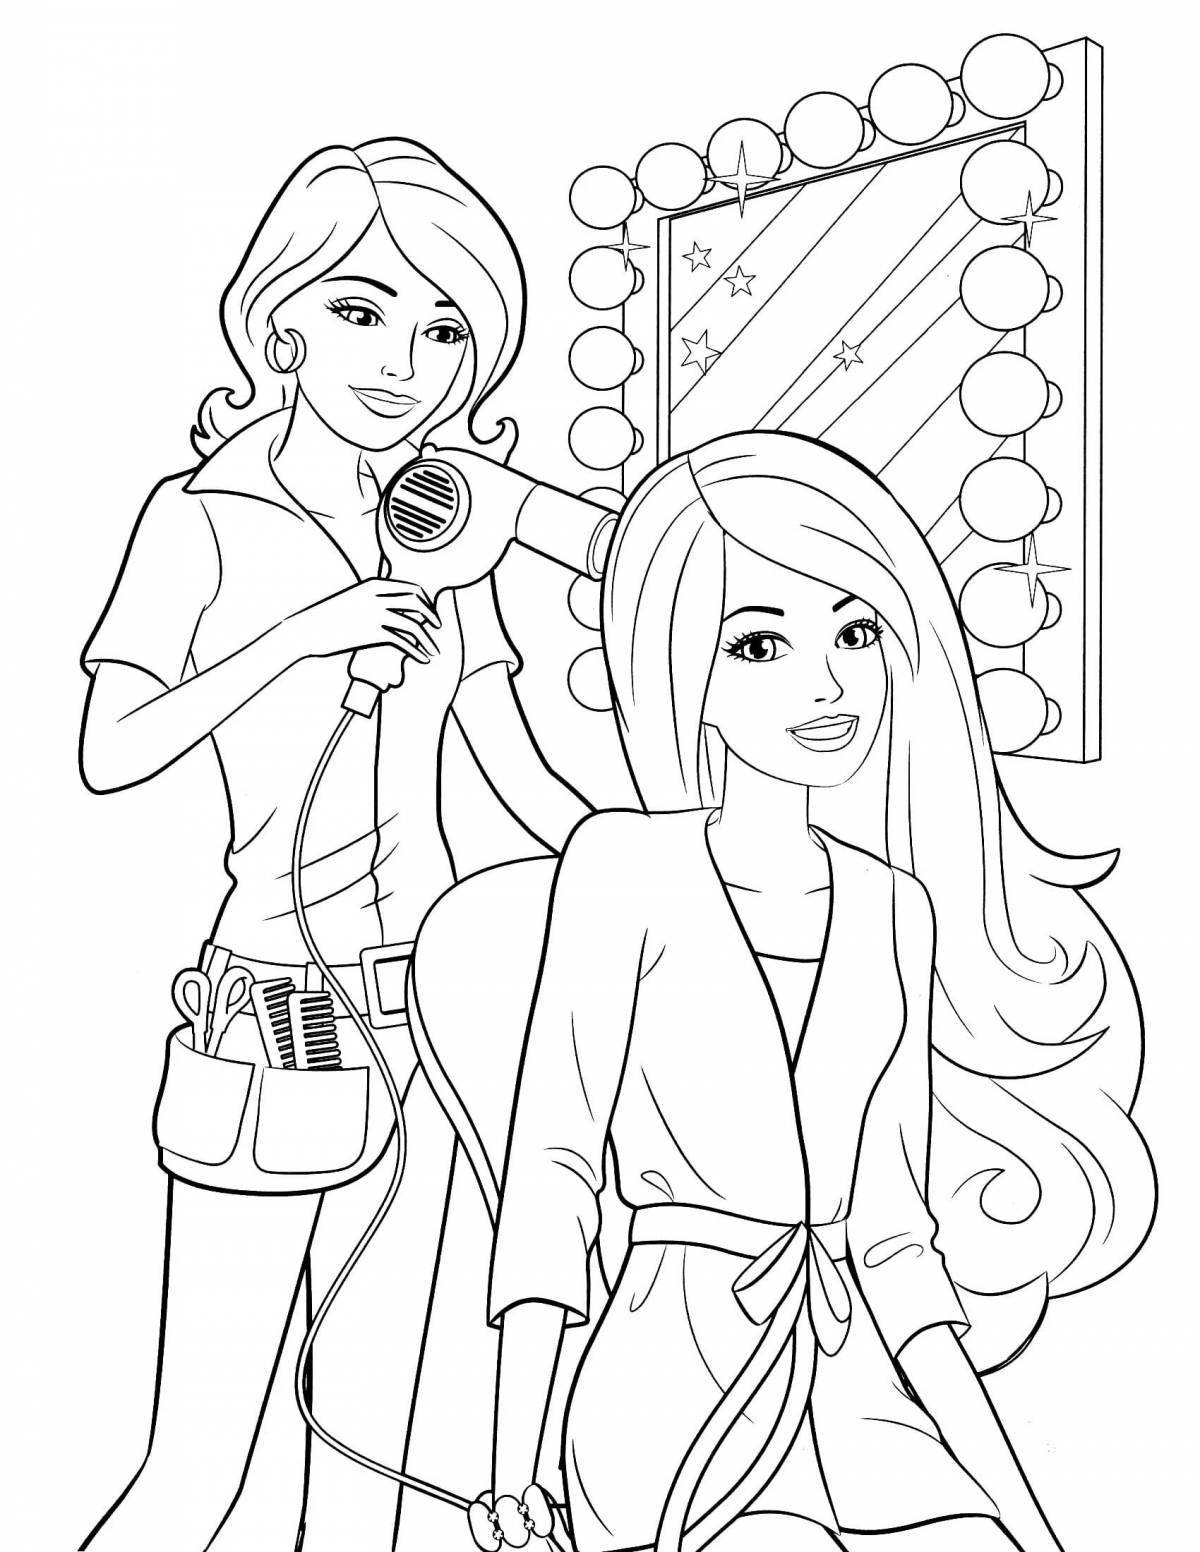 Coloring page charming beauty salon